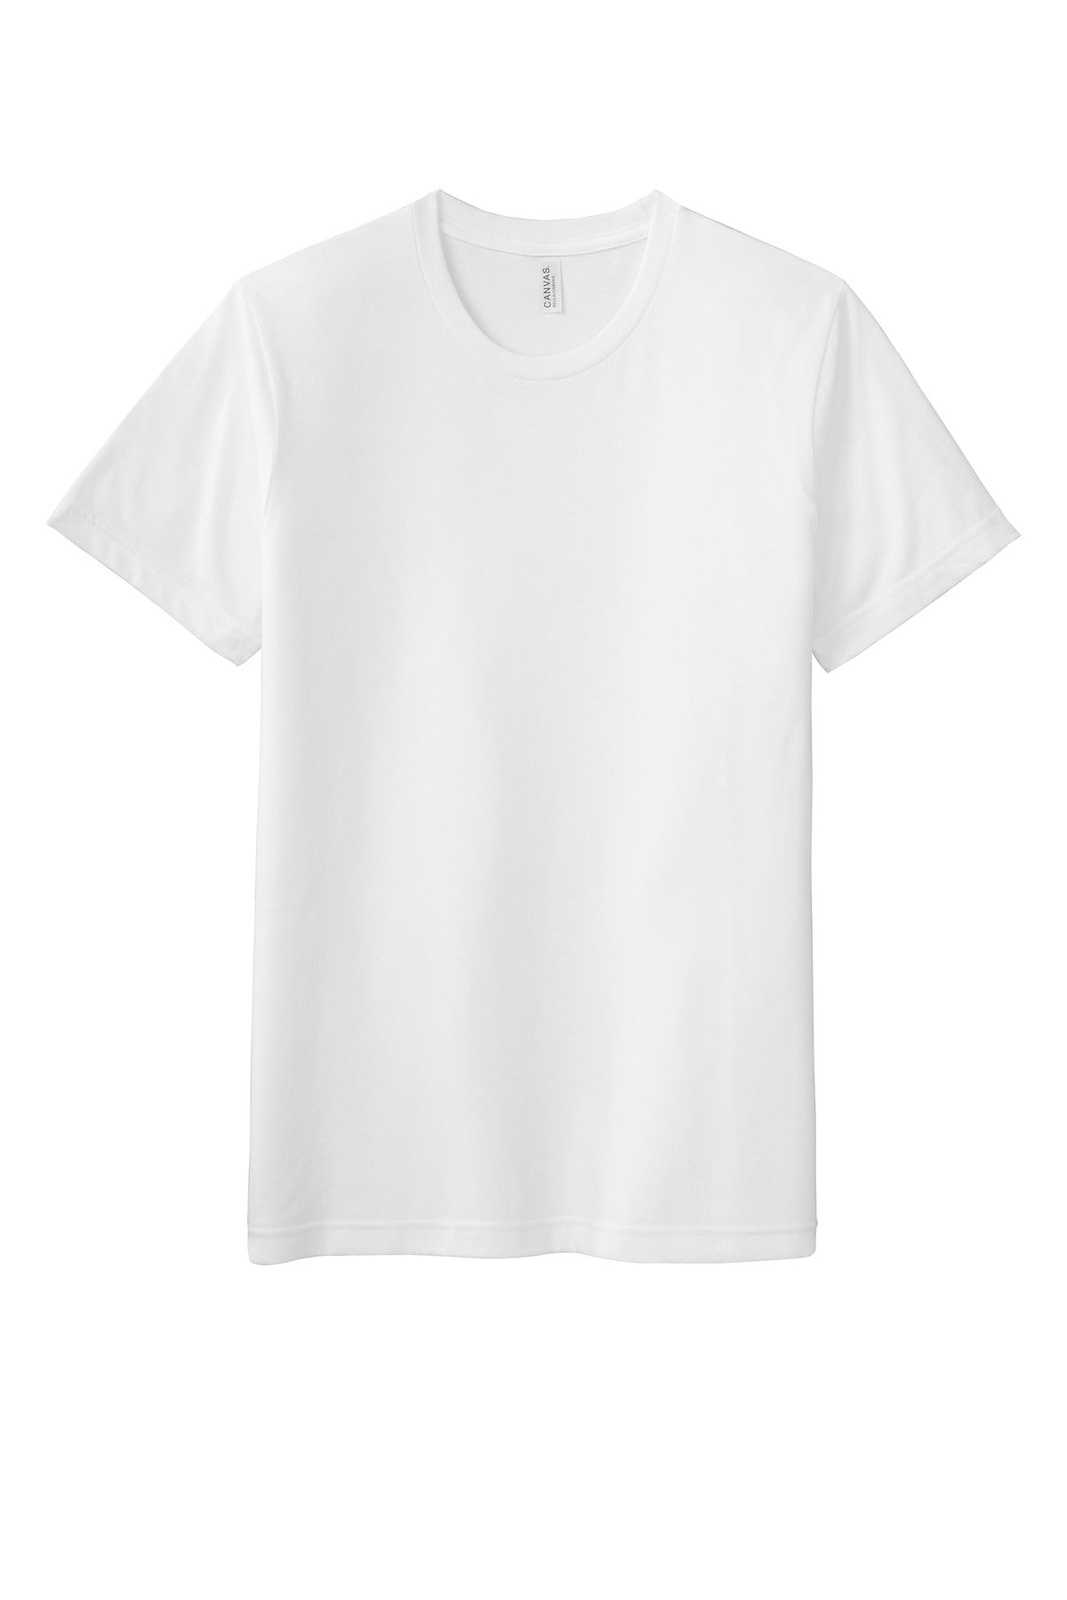 Bella + Canvas 3301 Unisex Sueded Tee - Solid White Blend - HIT a Double